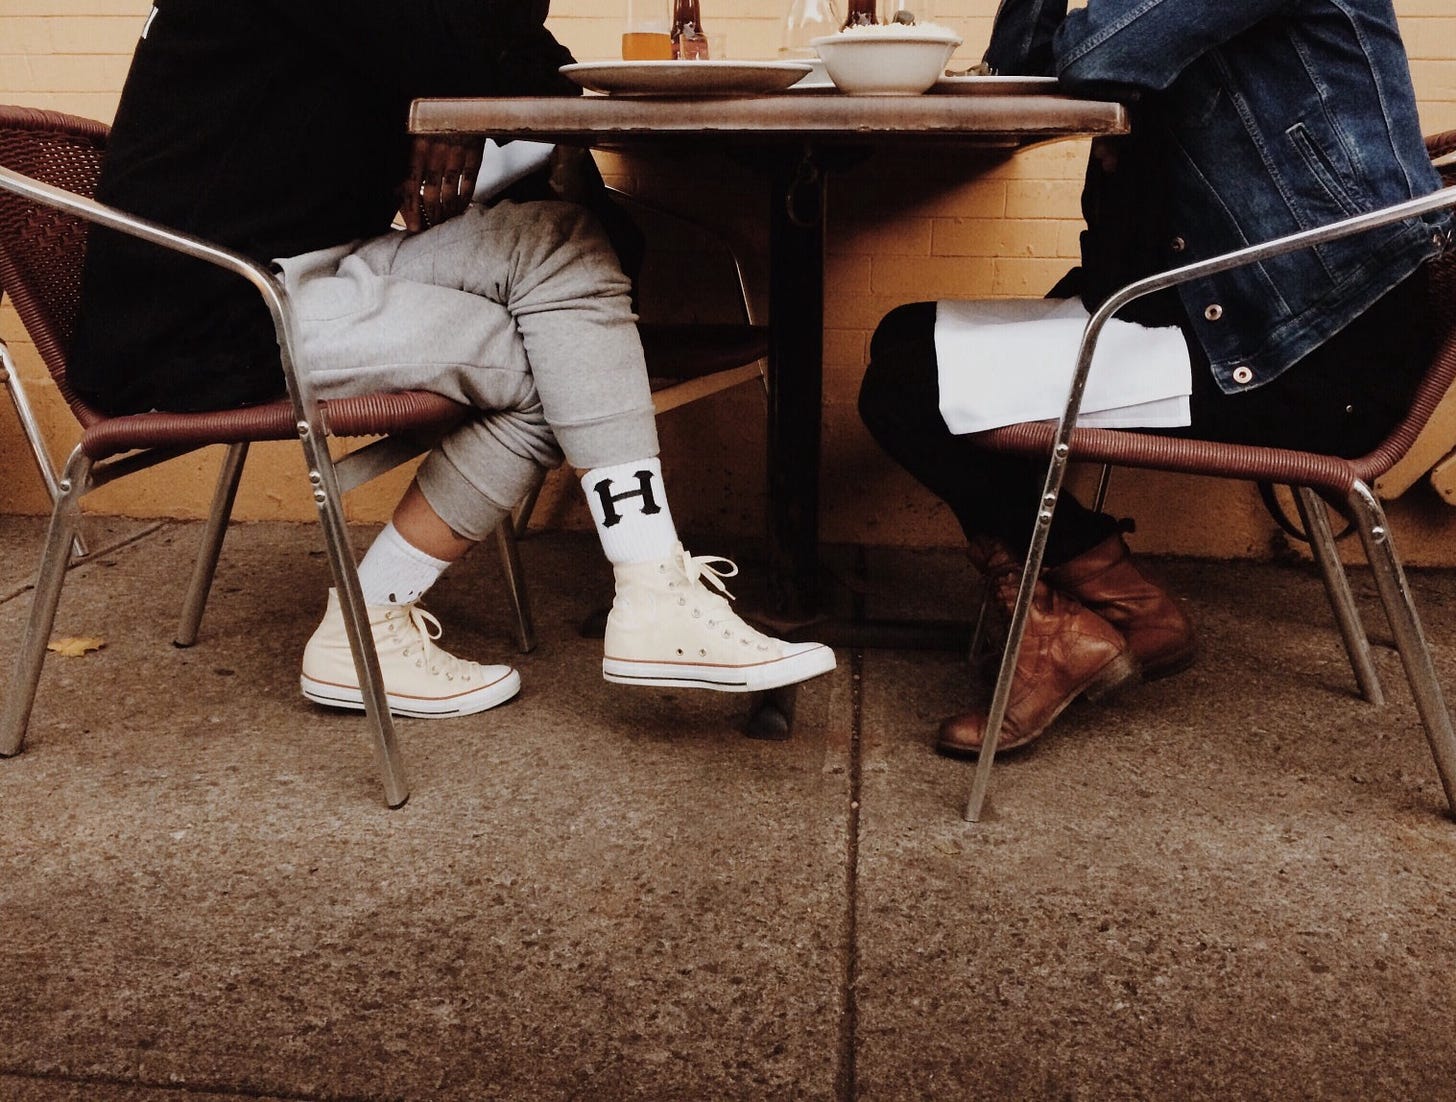 A couple sits across from one another in a cafe.